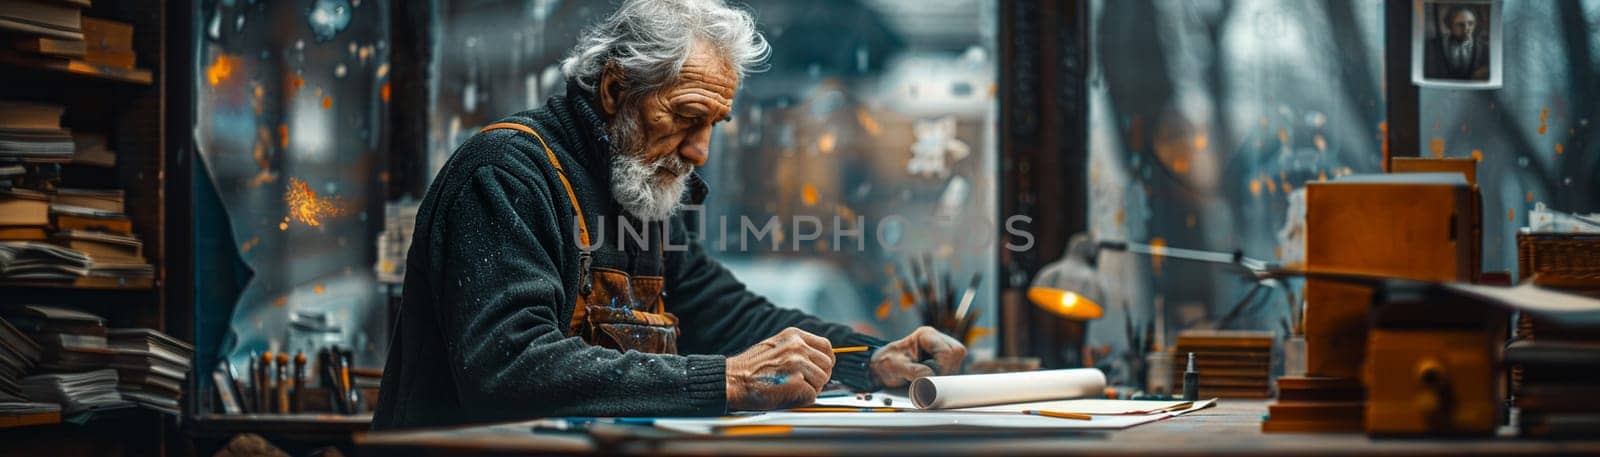 Window view artist at work, depicted in a hyper-realistic style with fine details and lifelike textures.